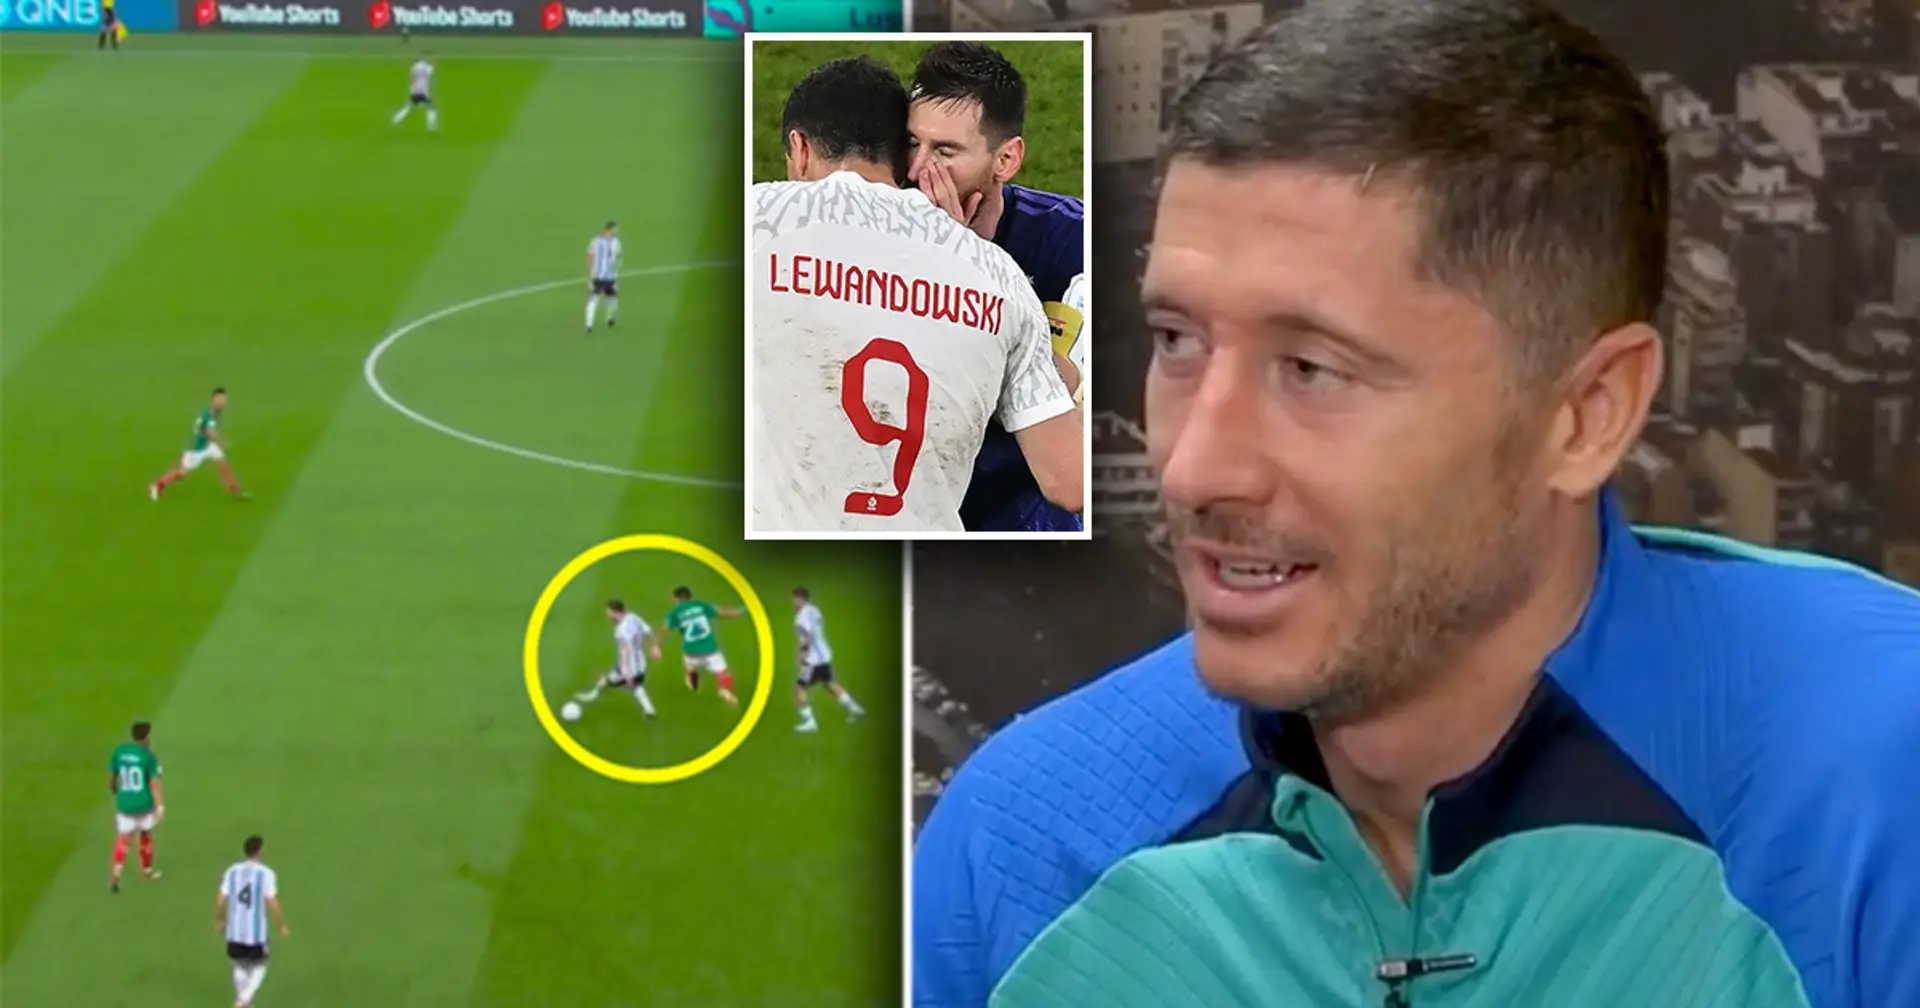 'He plays differently now': Lewandowski hints he'd like to play with Messi one day